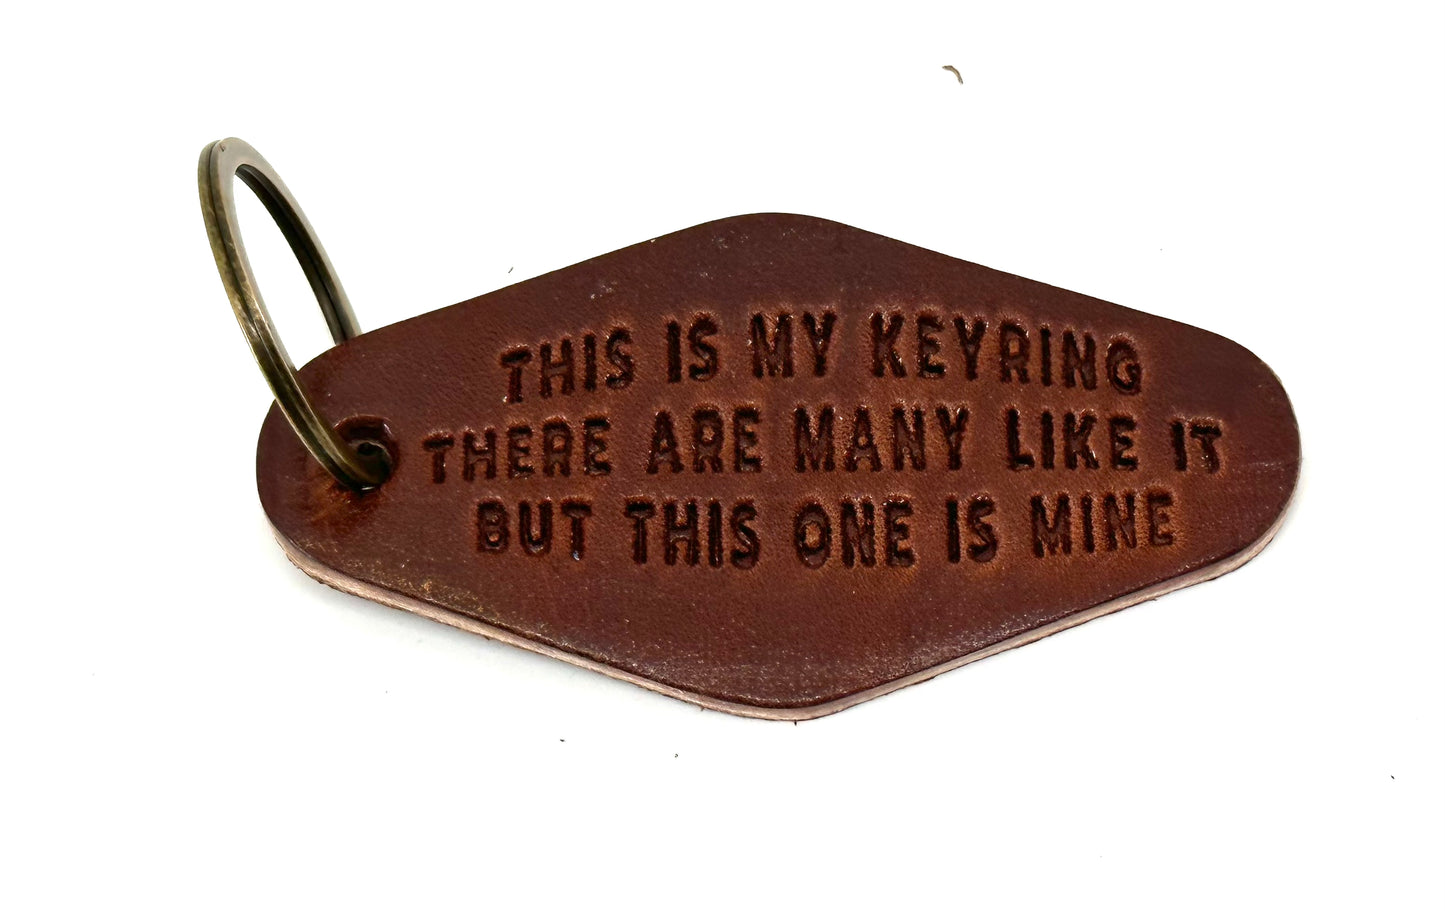 Our Motel Keychain - This is My Keychain…